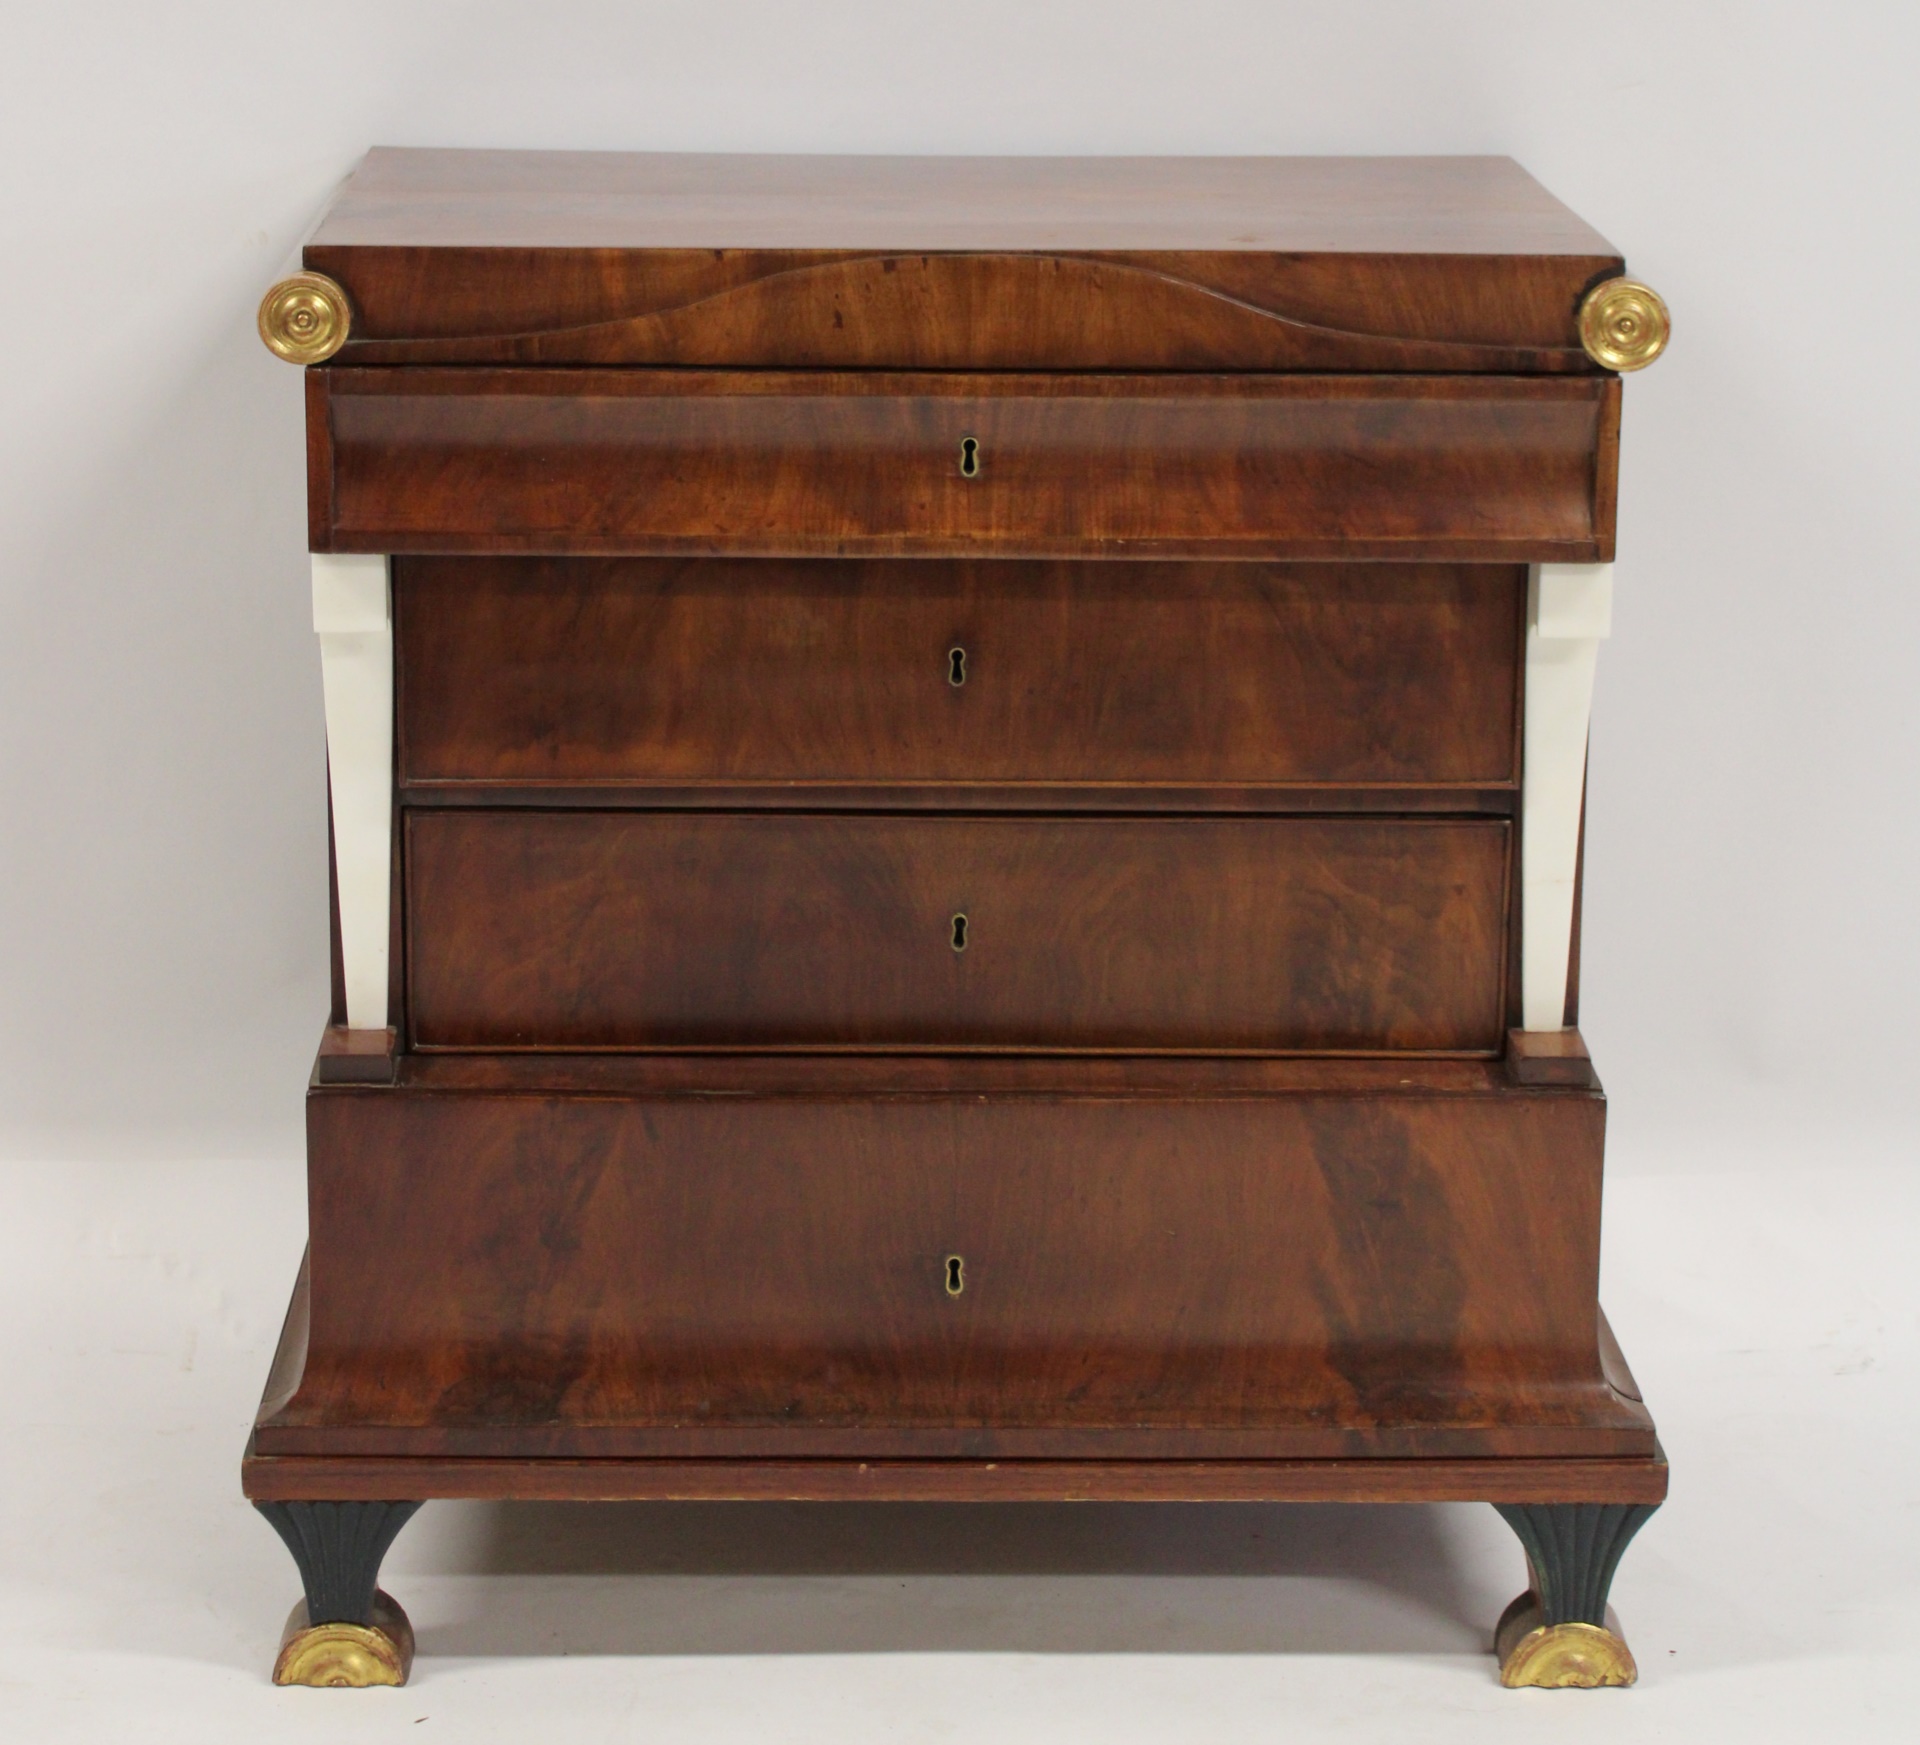 EMPIRE MAHOGANY CHEST WITH MARBLE 3b90d4